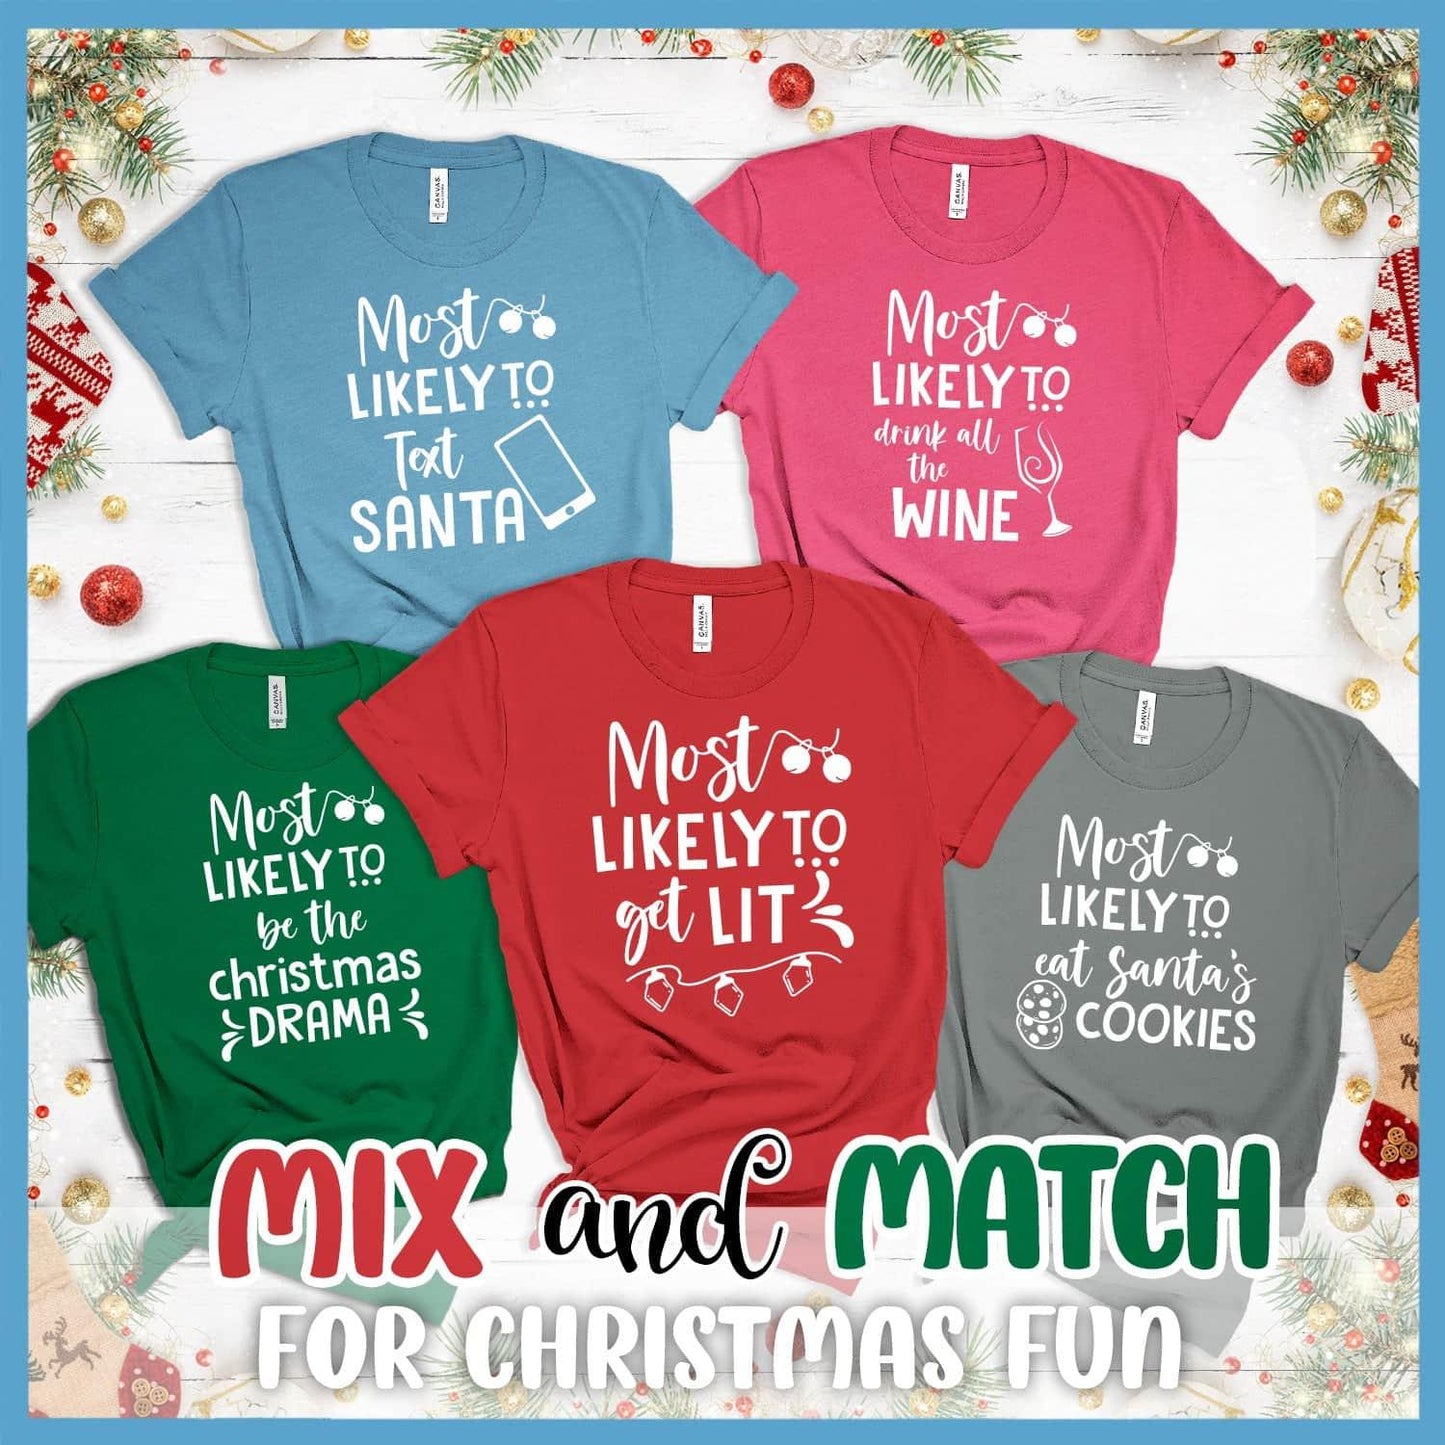 Most Likely To Text Santa T-Shirt